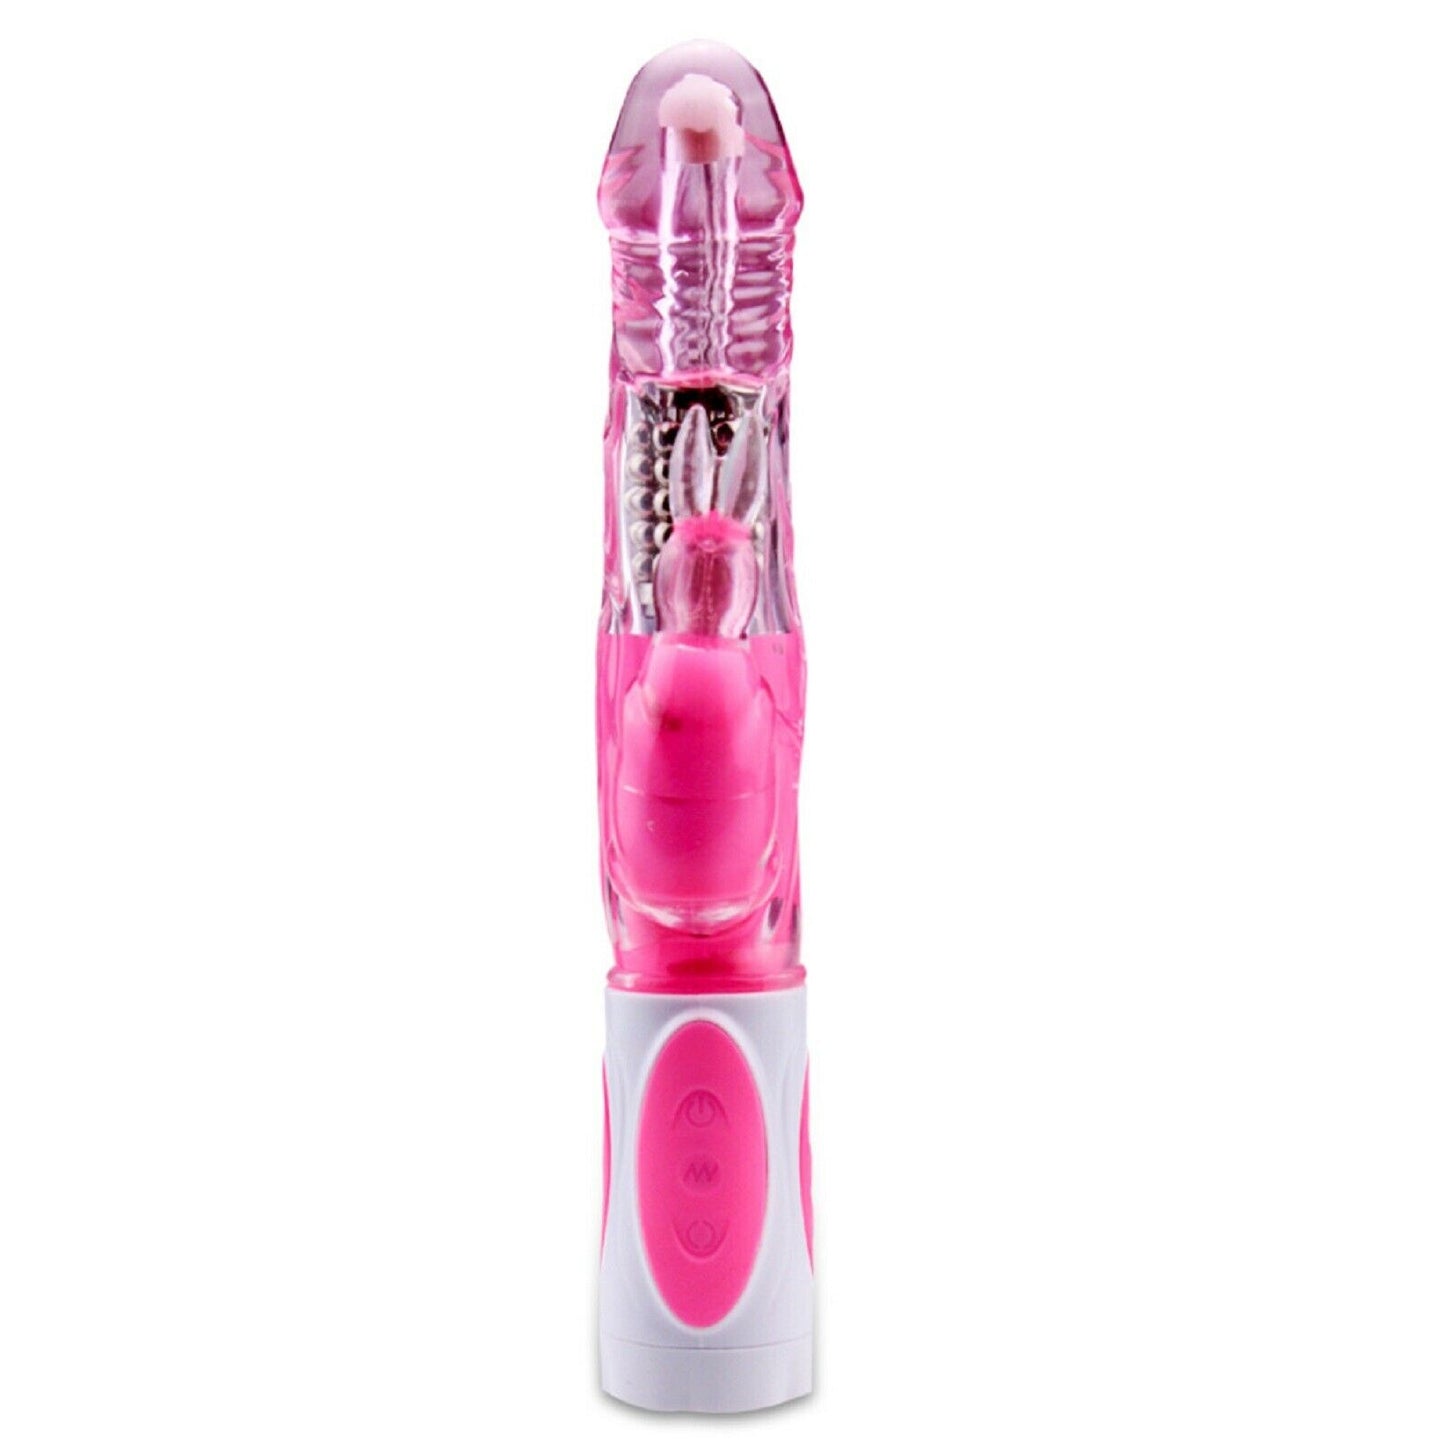 Double Rabbit Vibrator G-Spot Dildo Clit Anal Beads Wand Clitoral Adult Sex Toy